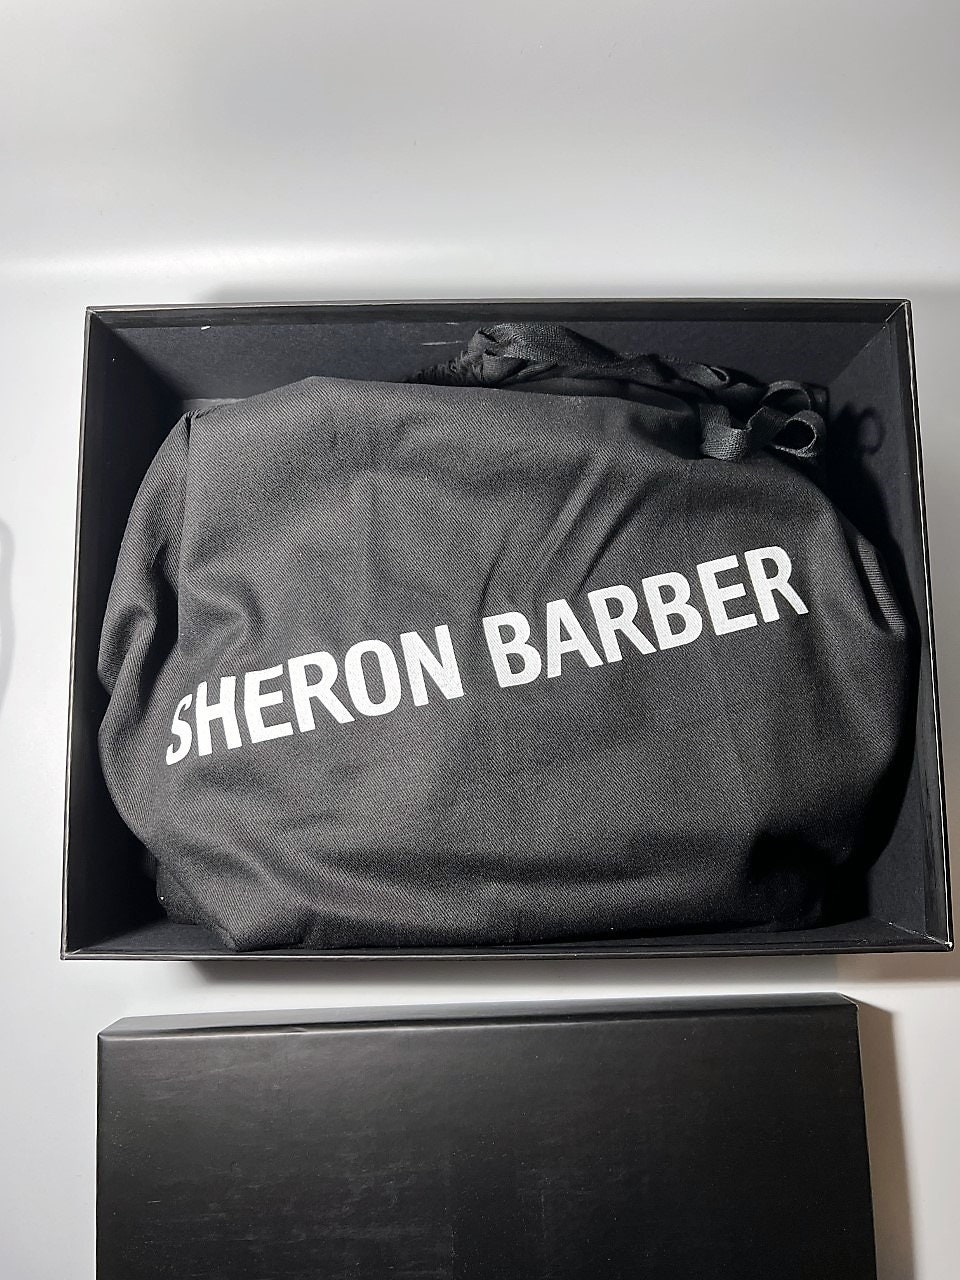 Get to Know: Sheron Barber